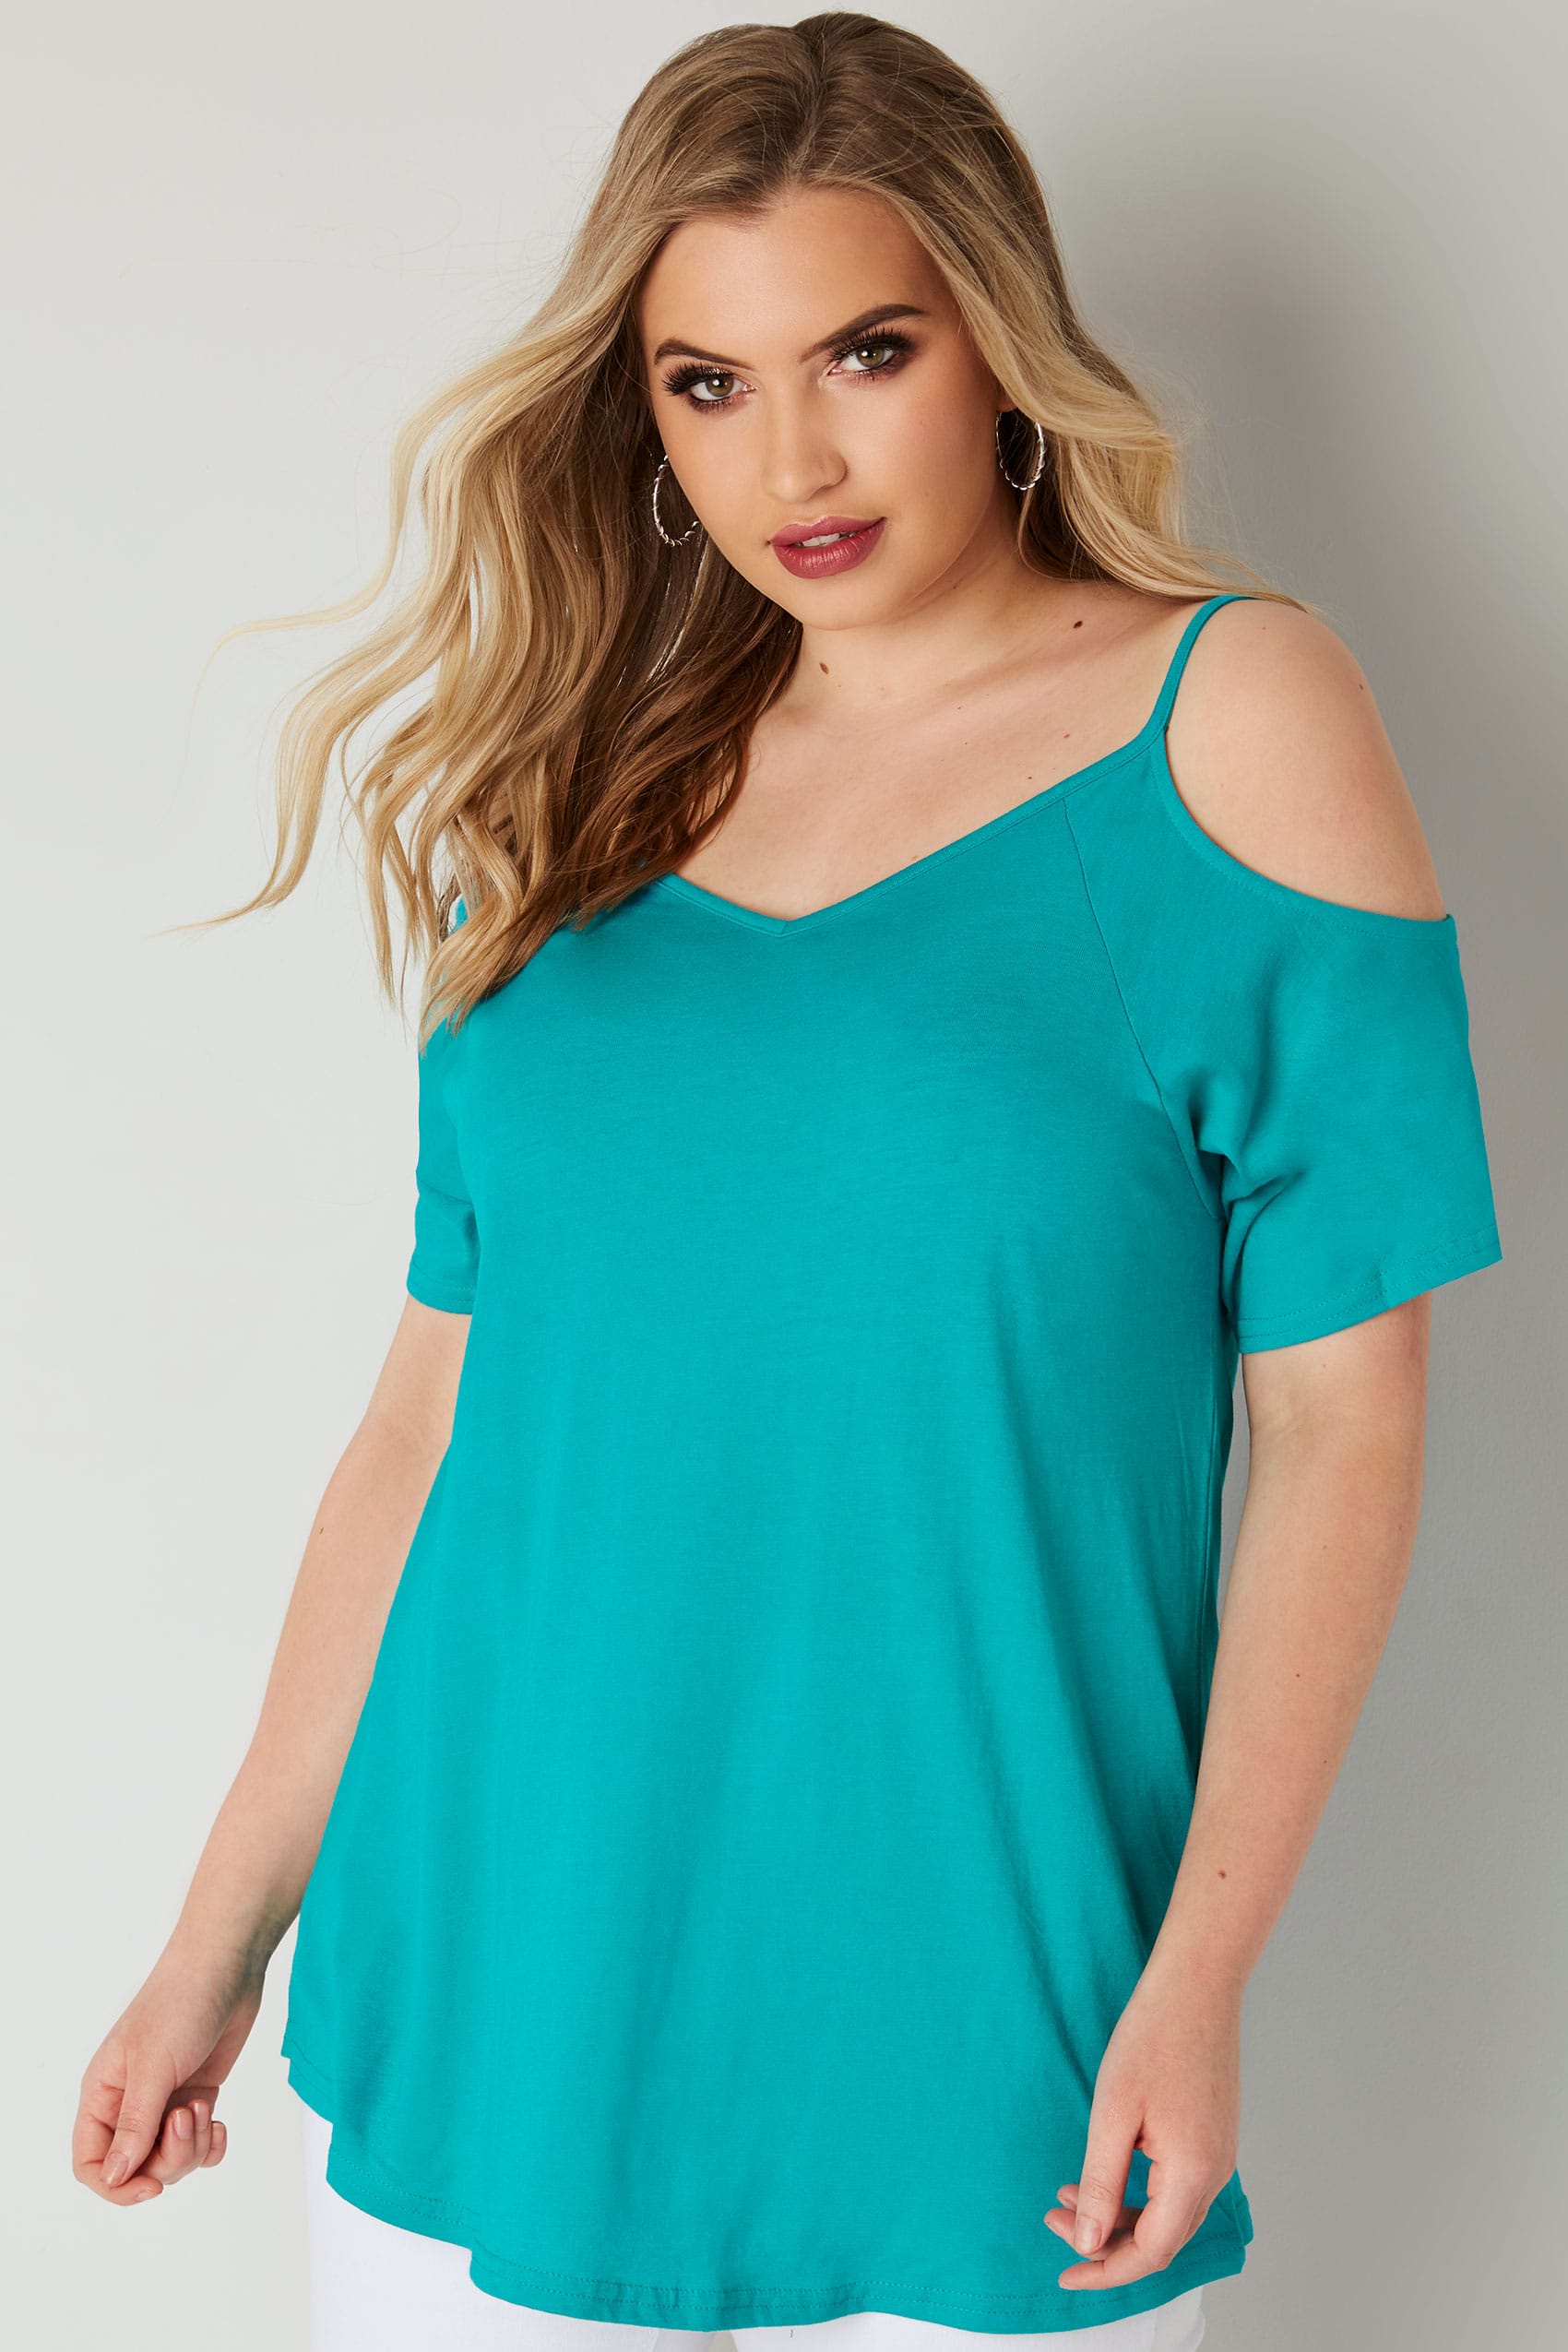 Teal Blue Cold Shoulder Jersey Top, plus size 16 to 36